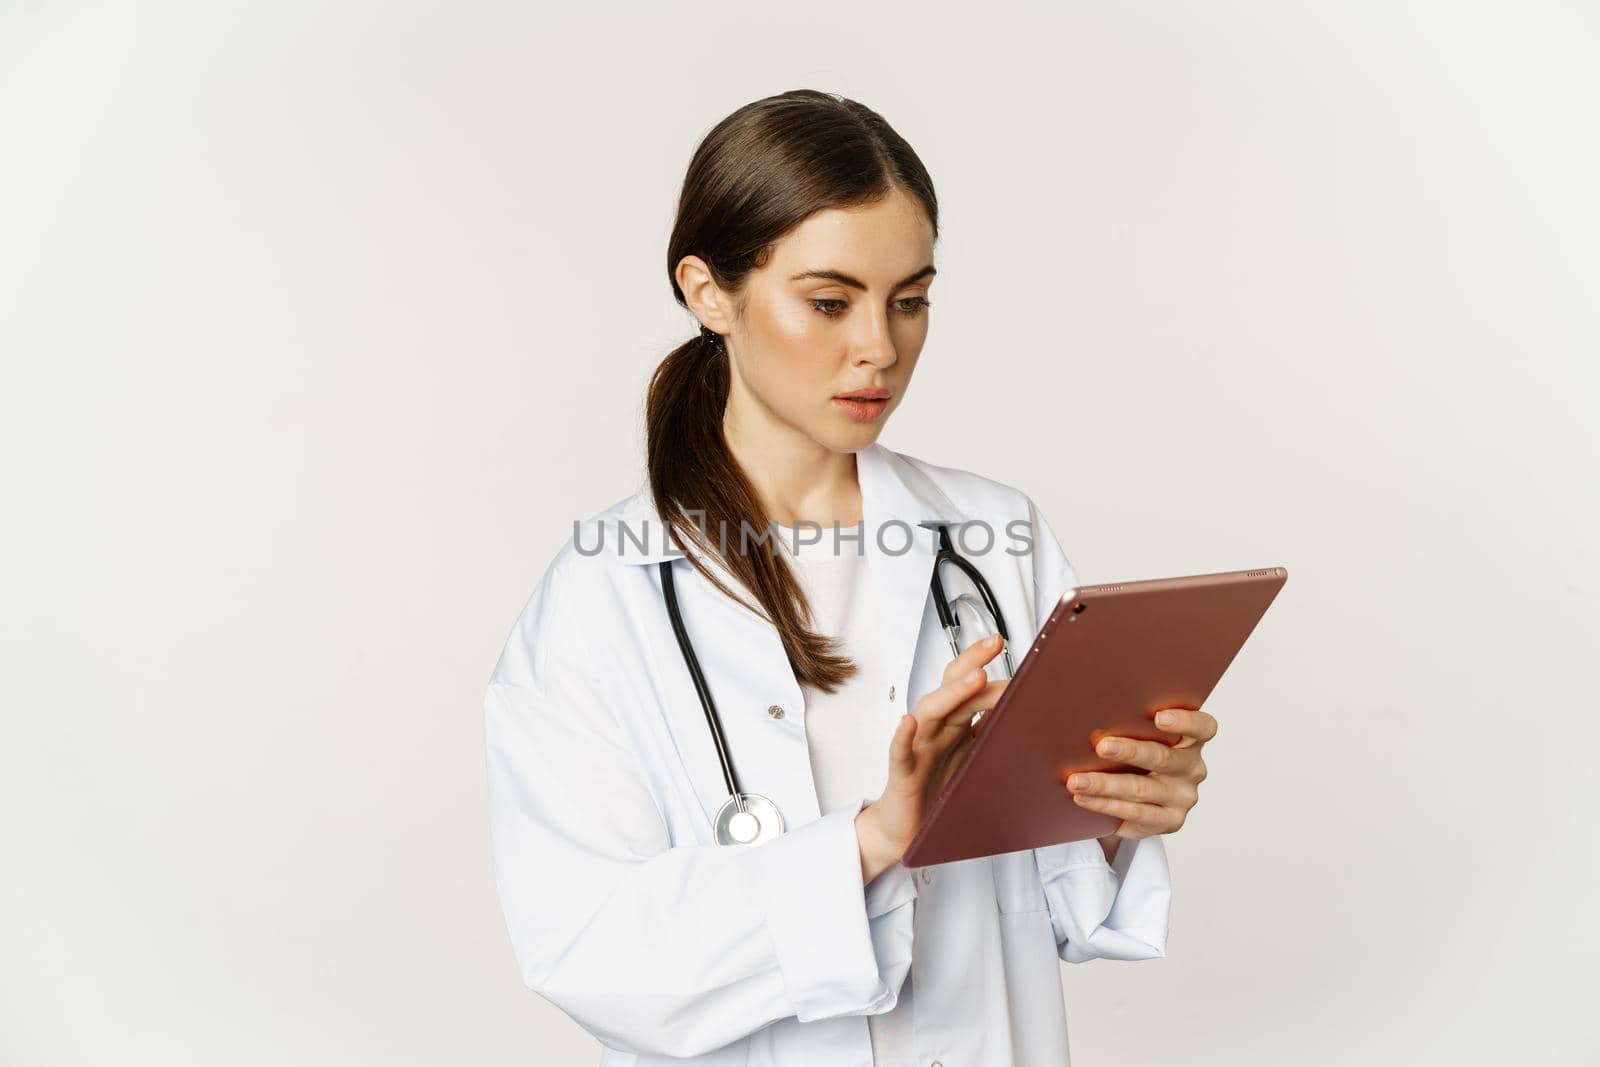 Woman doctor looking concerned at digital tablet, reading with worried face expression, wearing white coat, standing over white background.